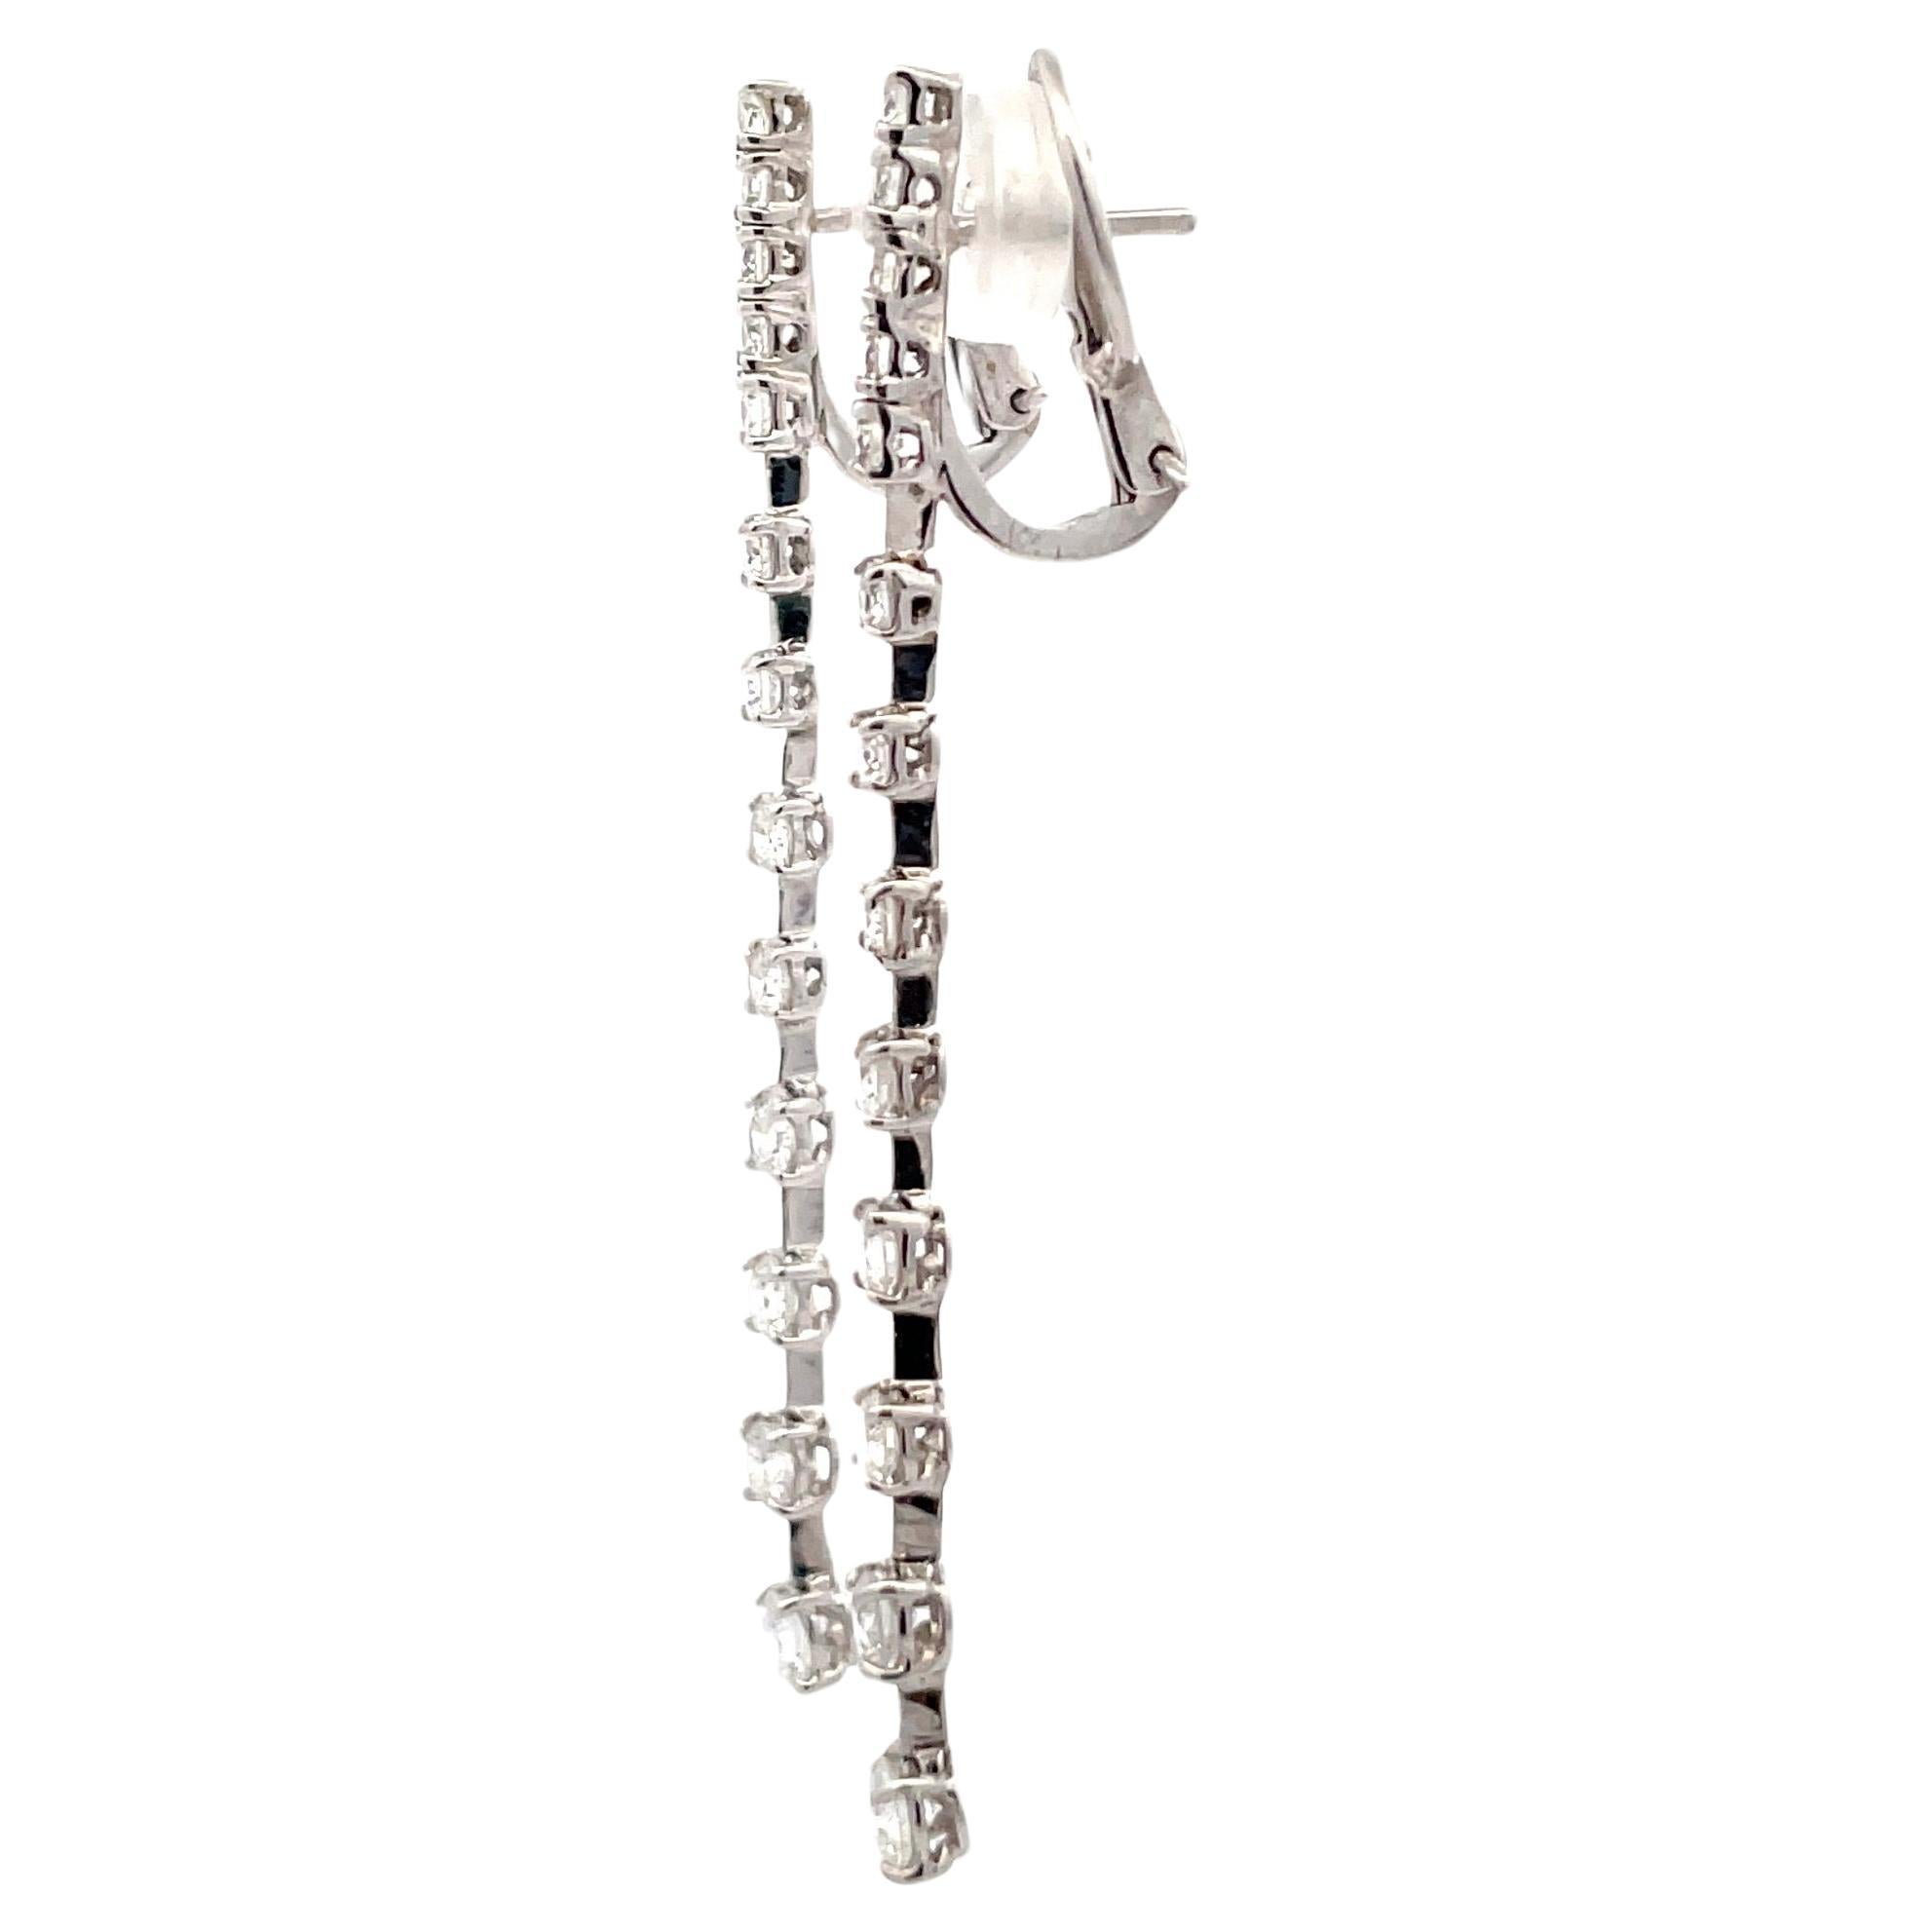 Long dangle drop earrings featuring a top diamond bar containing 10 round brilliants weighing 1.05 carats, 14 round brilliance, weighing 0.69 carats and two bottom round brilliants, 0.37 carats, and 18 karat white gold.